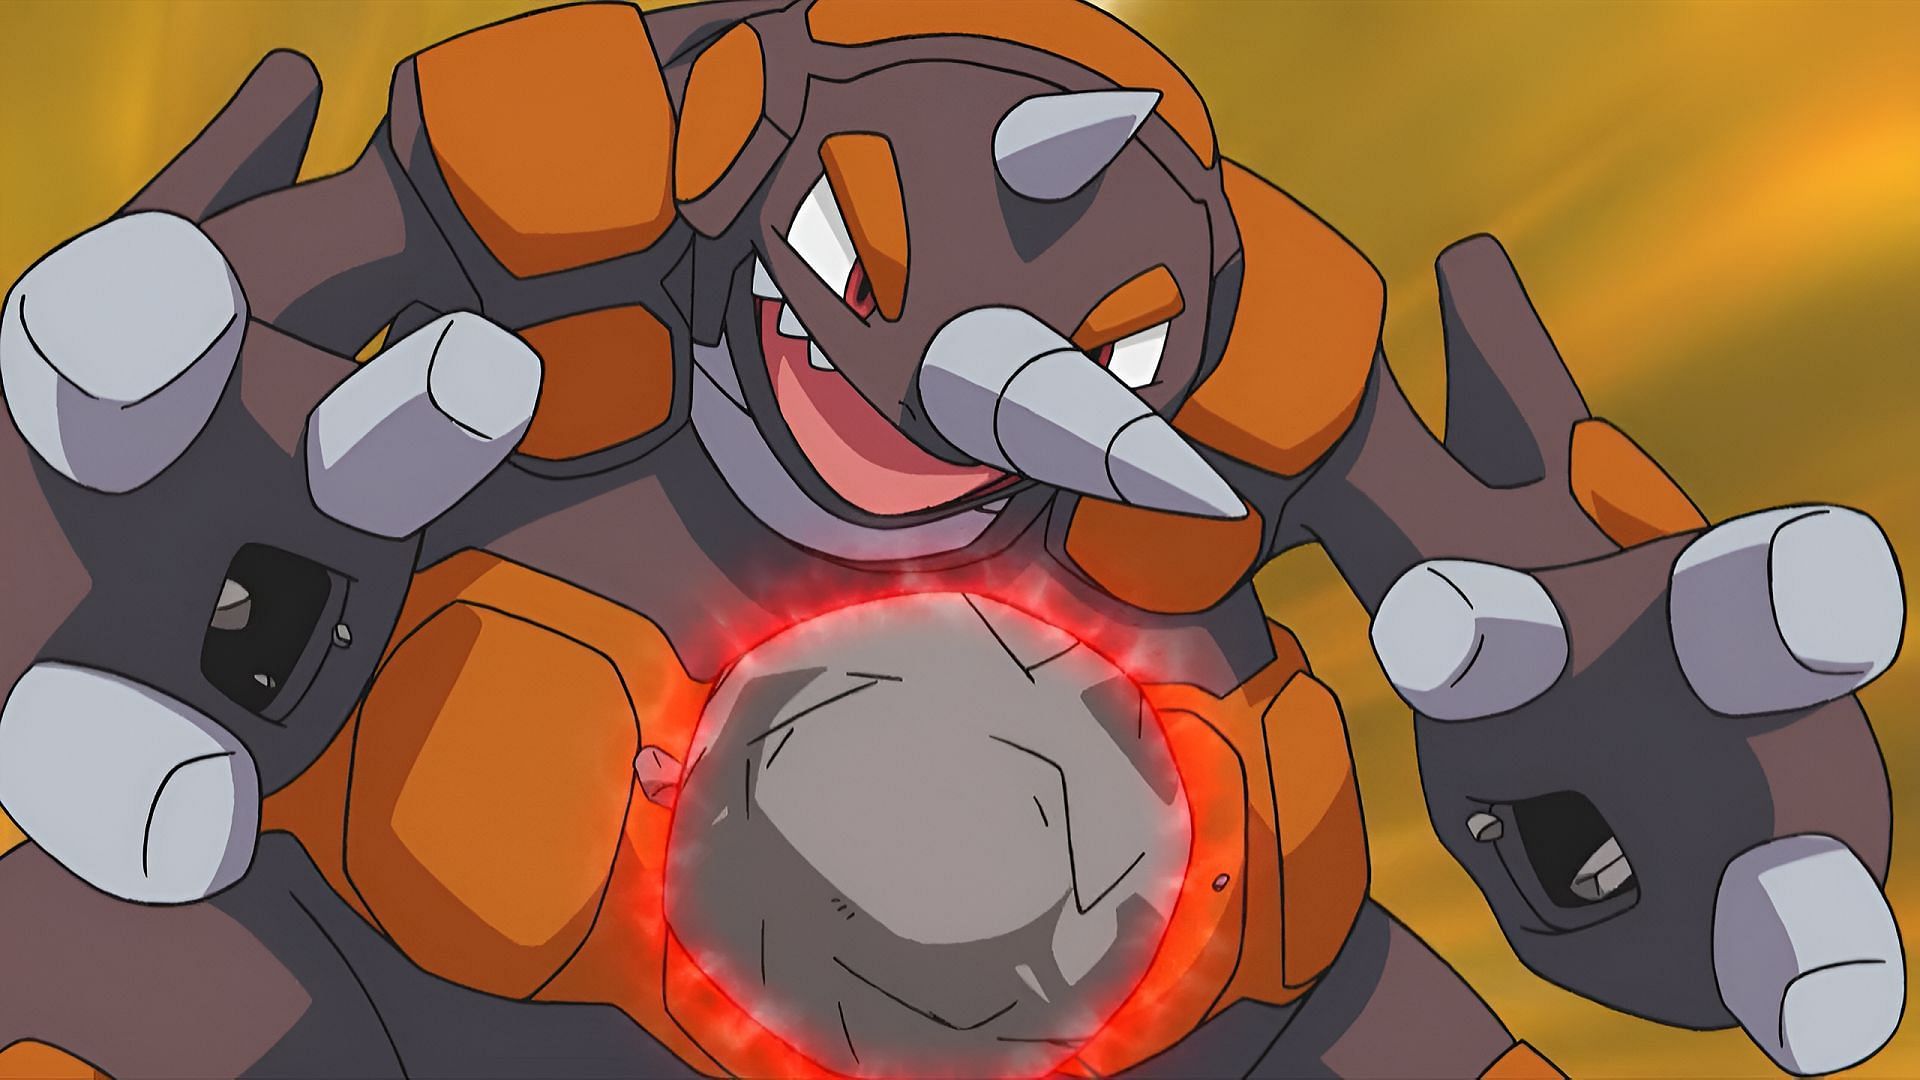 A Rock/Ground-type like Rhyperior can deal massive damage to Shadow Moltres (Image via The Pokemon Company)